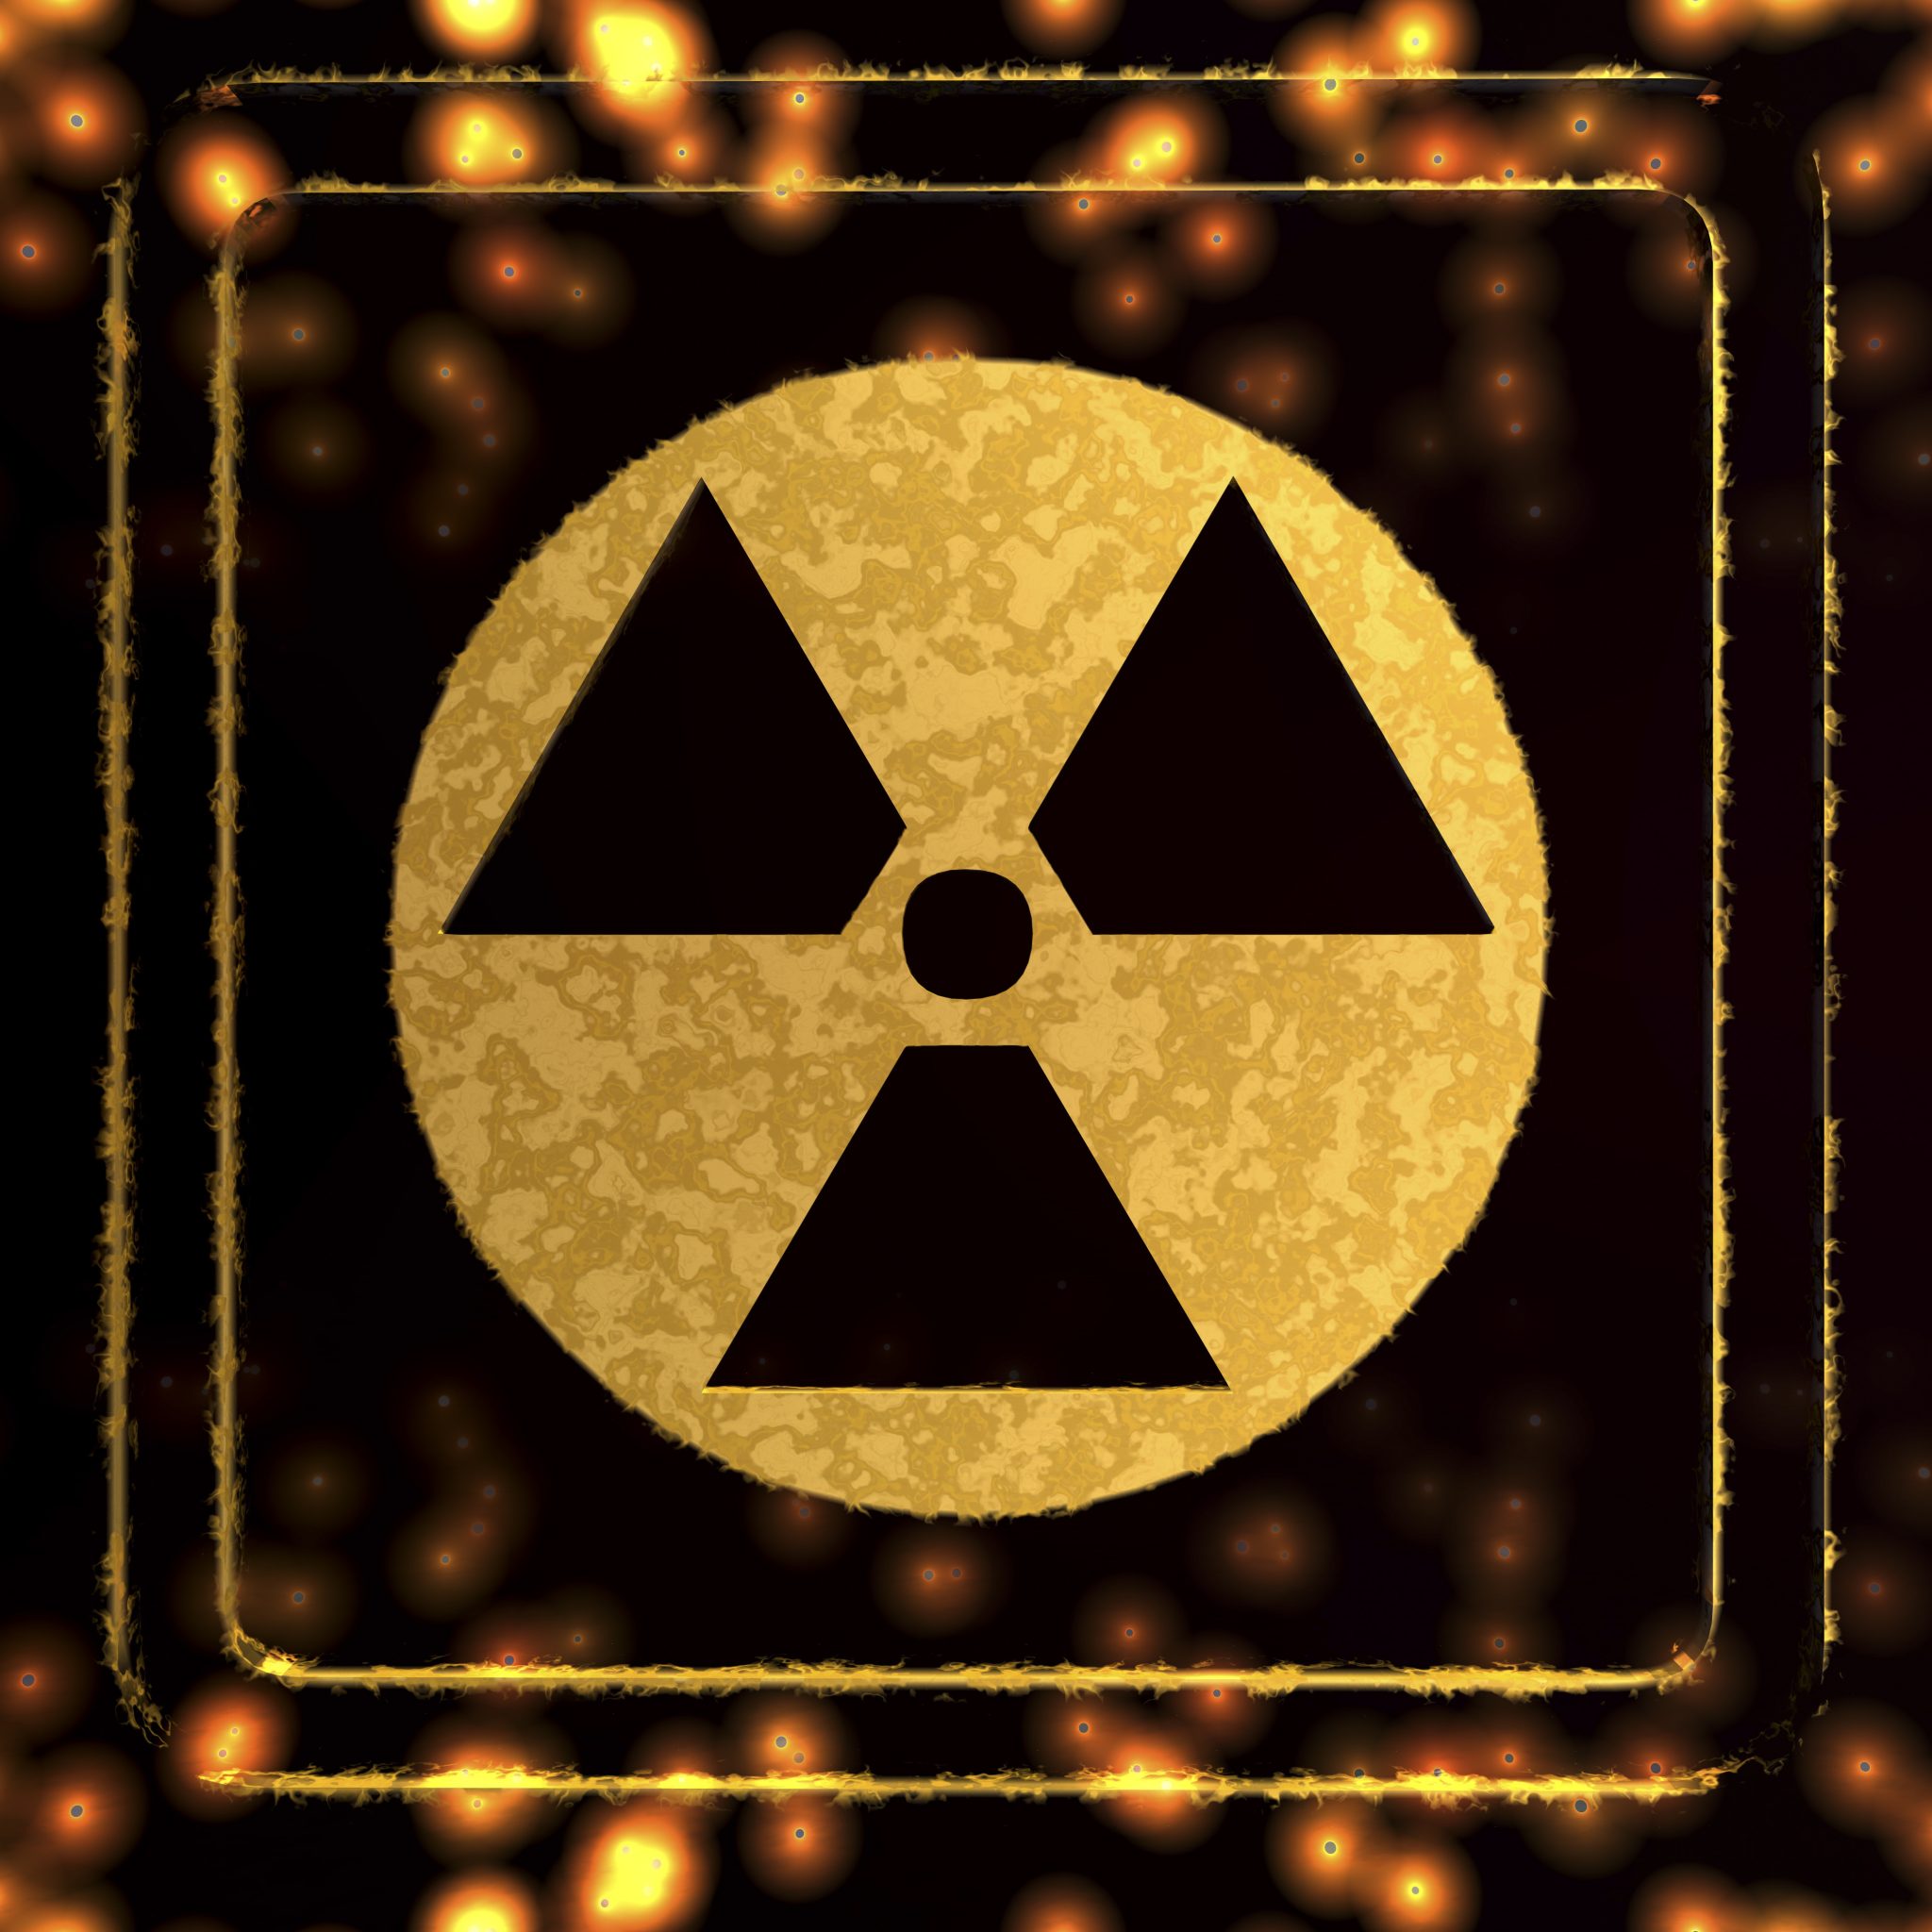 synthetic DNA, radioactive fallout